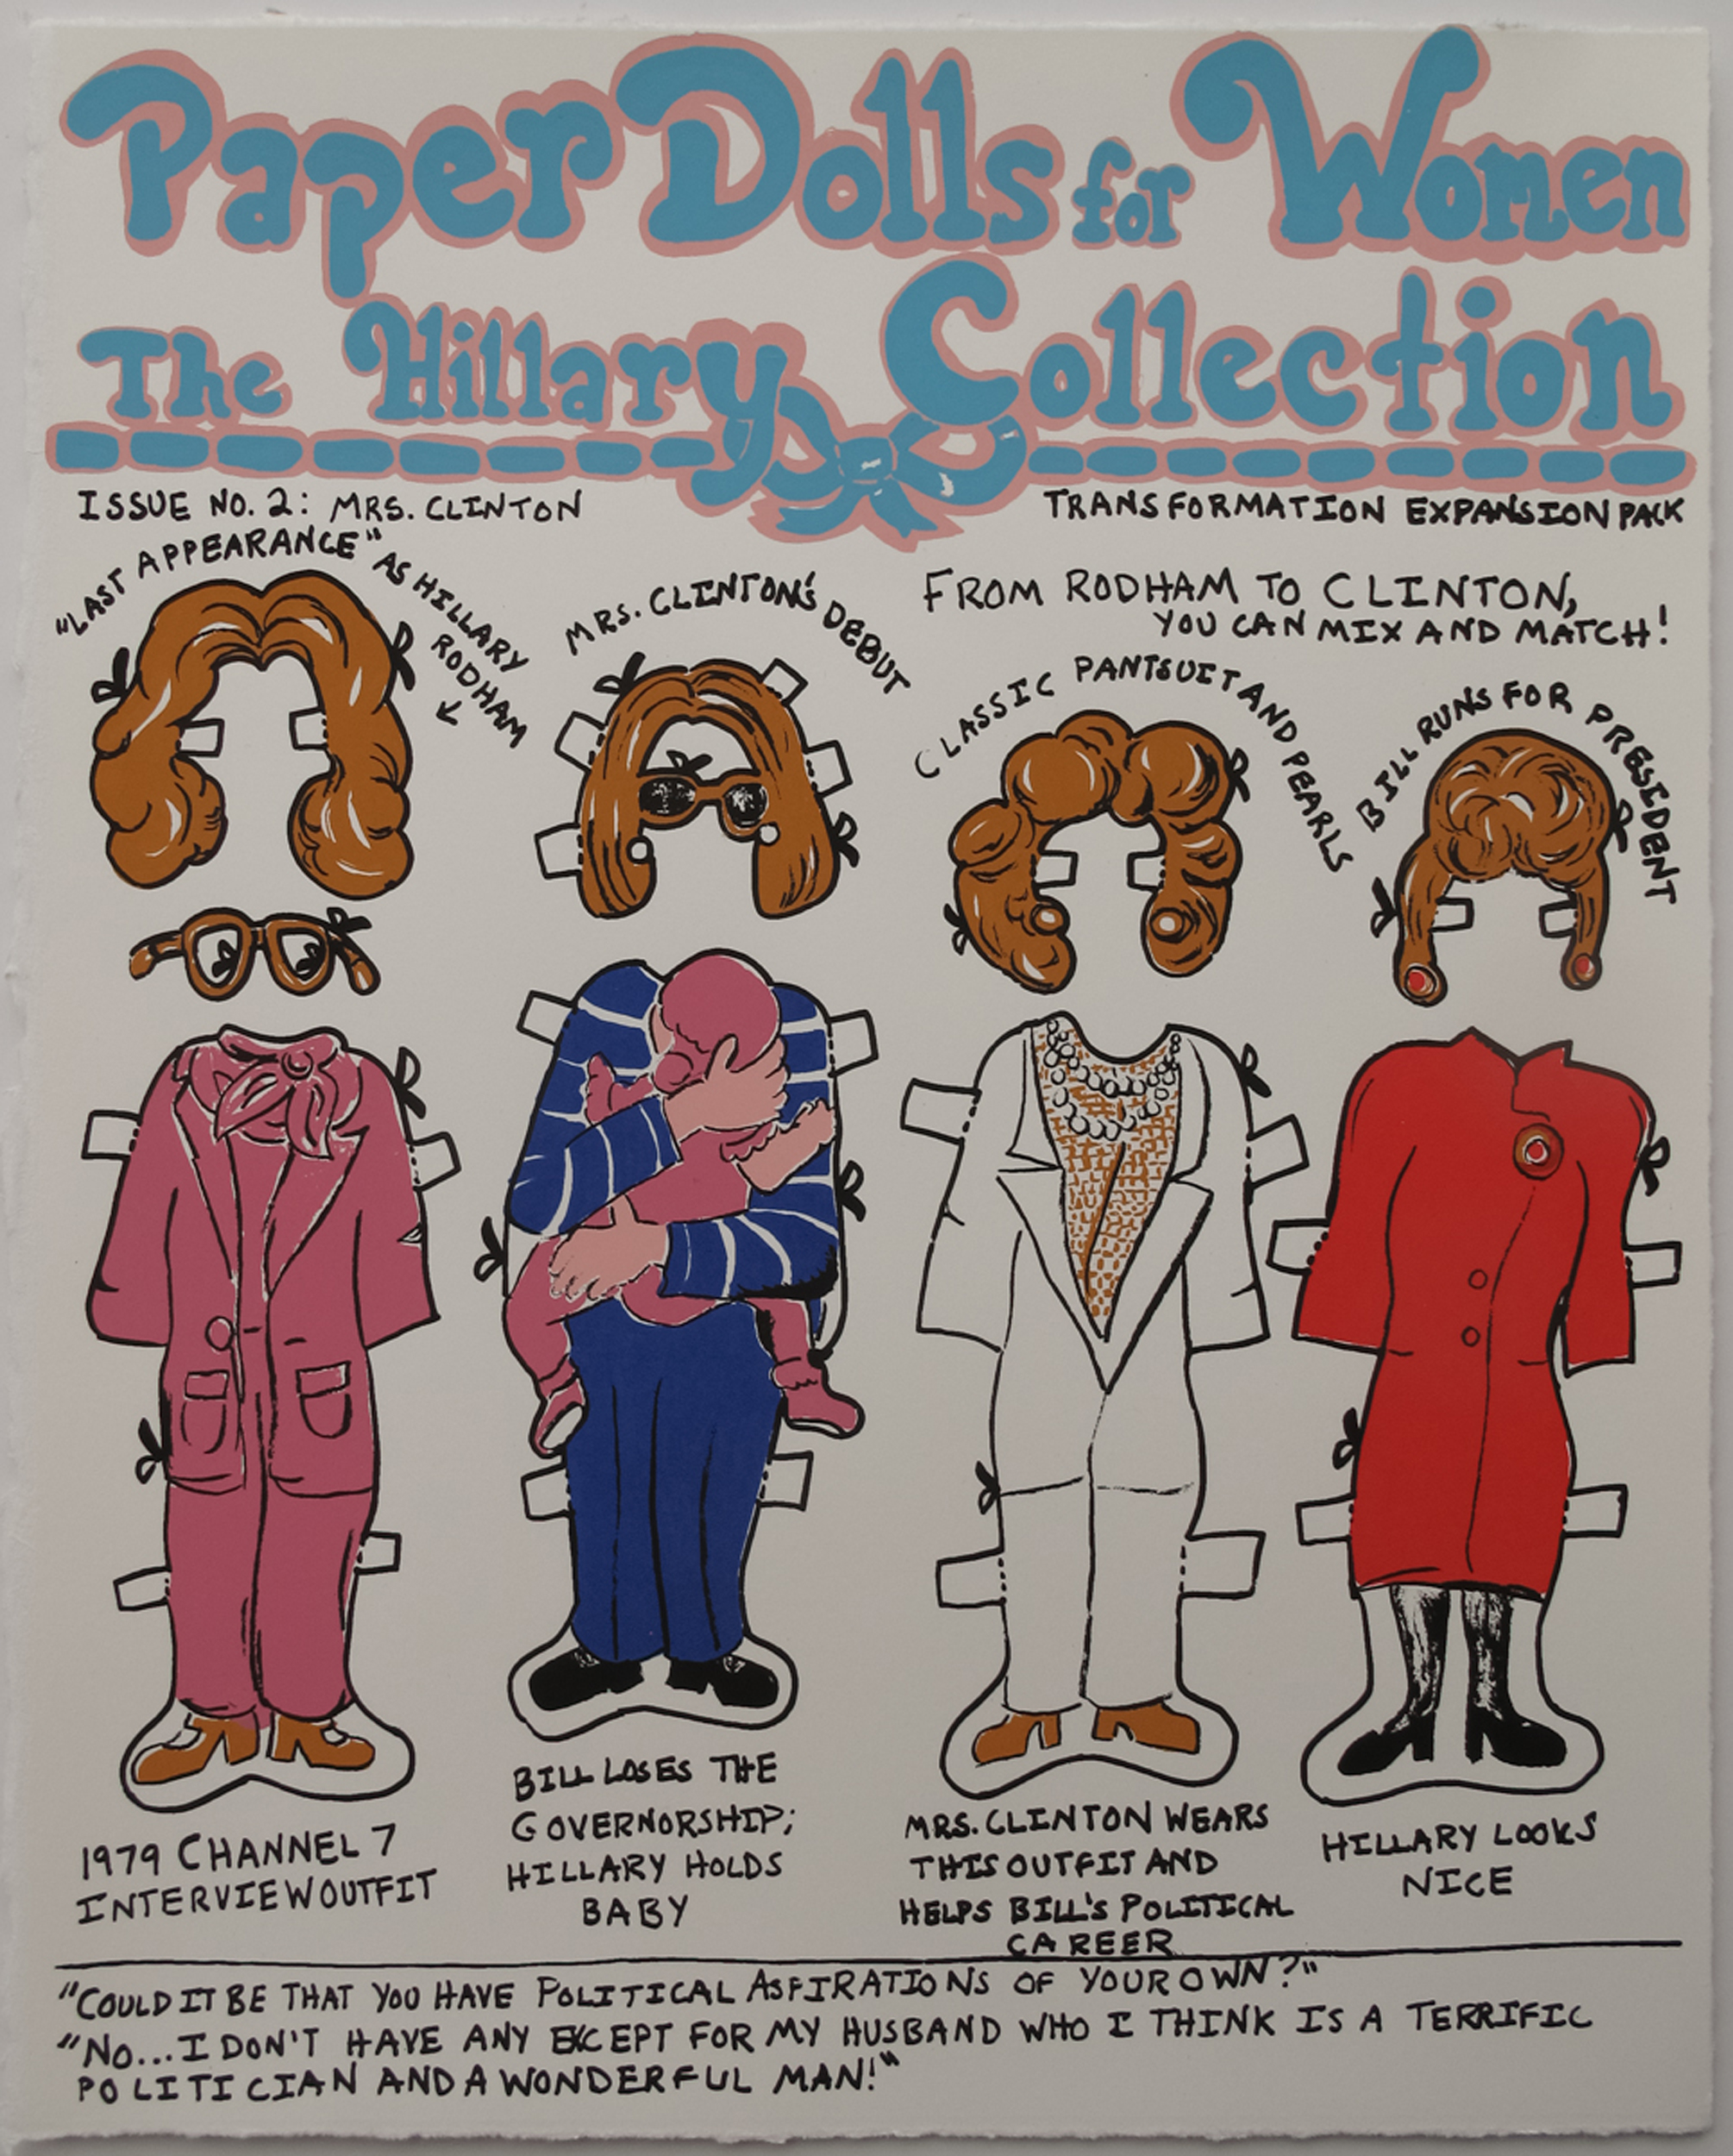 Nicole Soley, Paper Dolls for Women: The Hillary Collection, Issue No. 2, screenprint